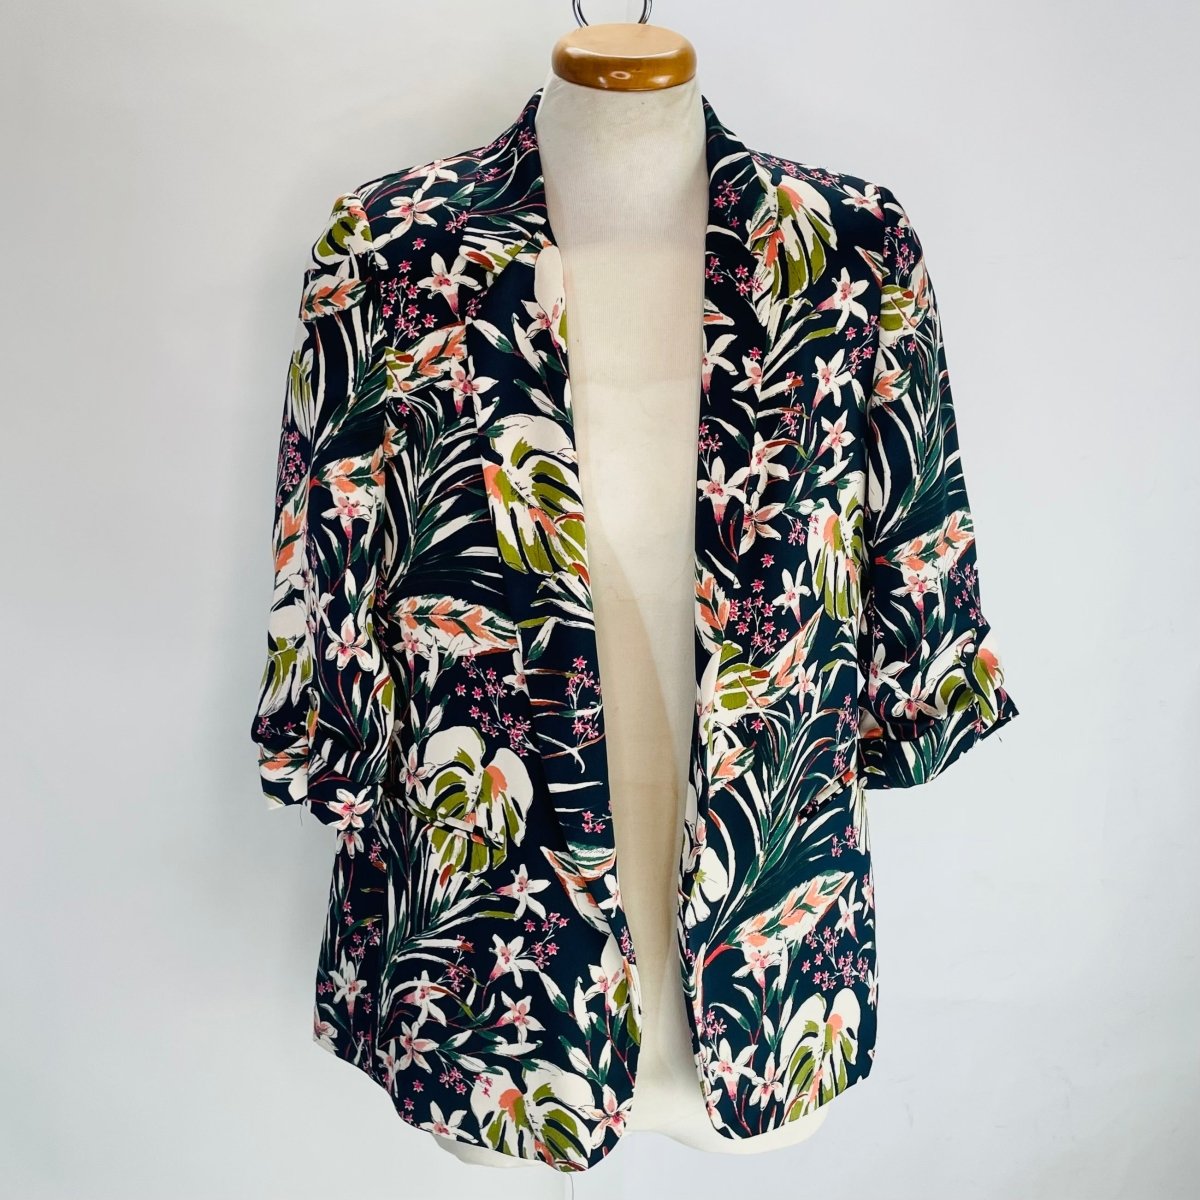 Satin Floral Blazer with ¾ Length Sleeves - Hart & Hive